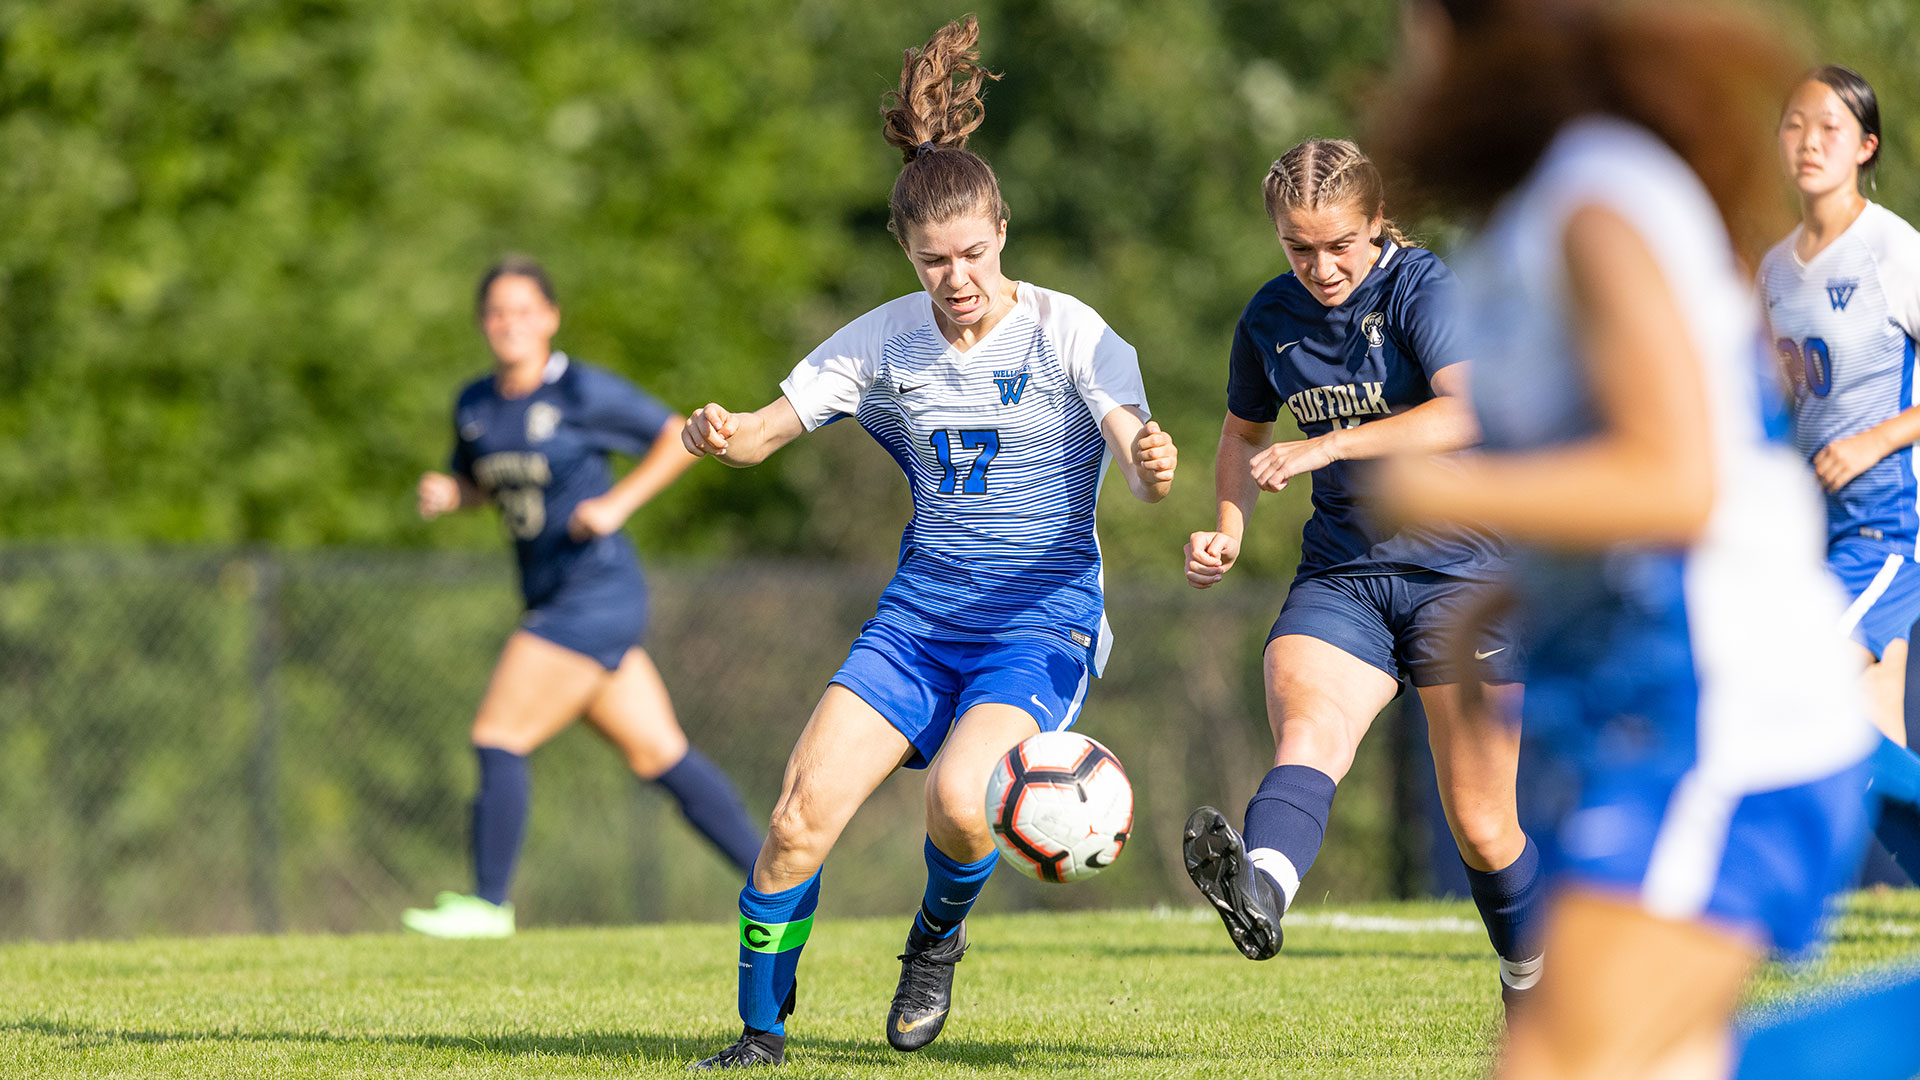 Danika Heaney '23 and the Blue will host Simmons in the season opener on Sept. 1 (Frank Poulin Photography).